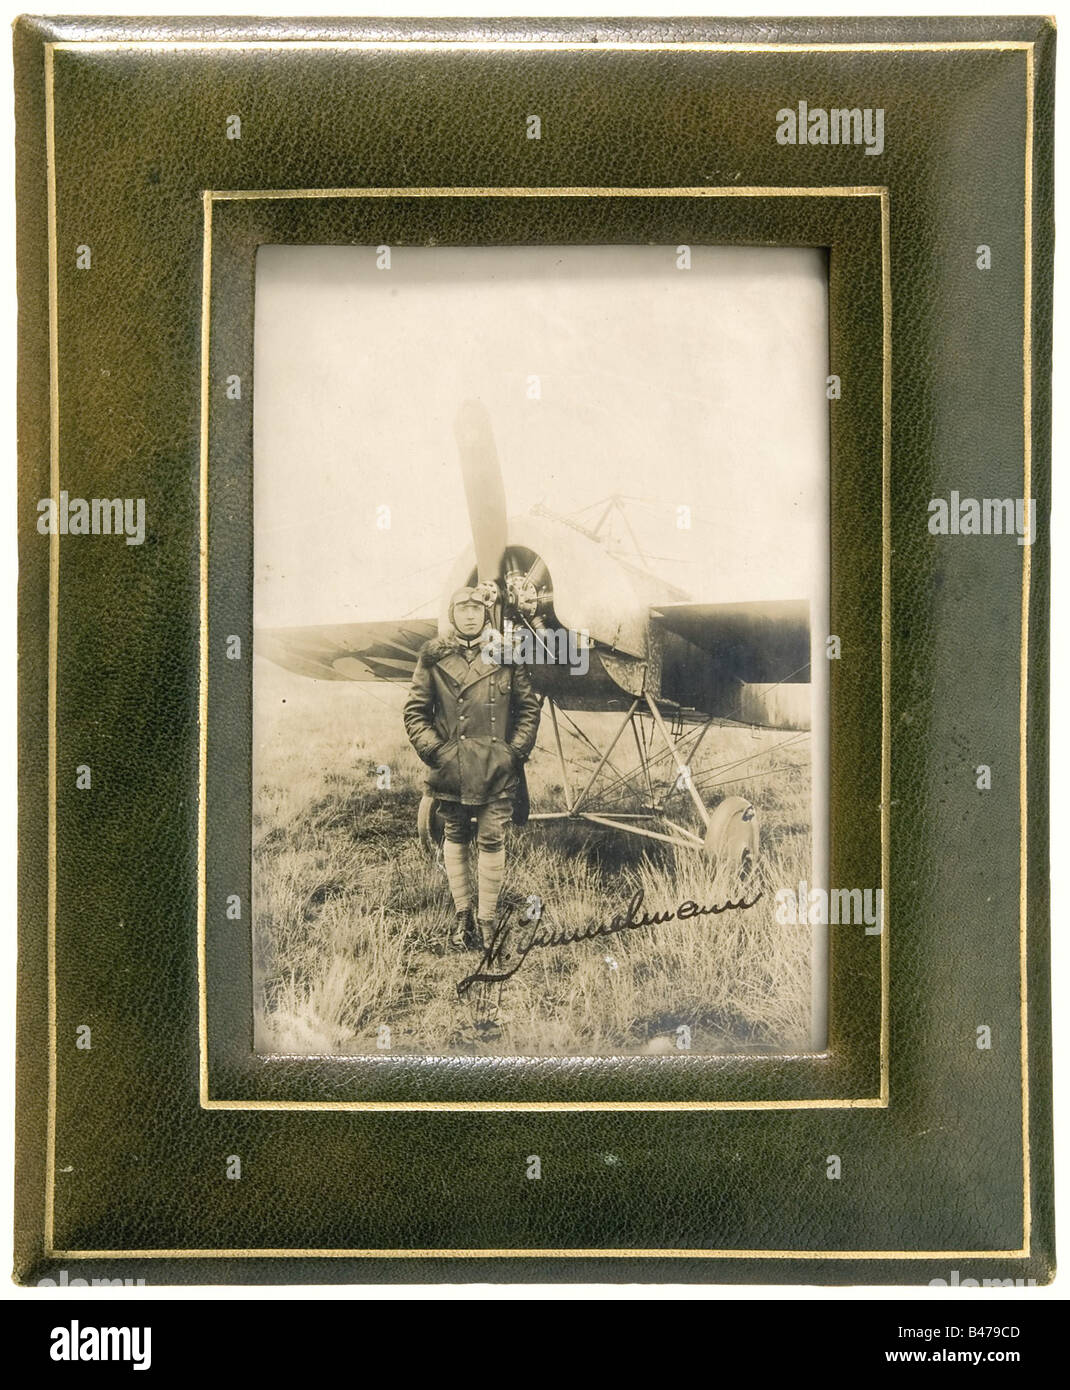 Max Immelmann - a portrait photograph with autograph 'M. Immelmann'., Immelmann wearing a leather flight jacket with fur collar, flying cap, goggles and puttees, standing with his hands in his pockets in front of his Fokker Monoplane E I 3/15. In the lower part of the picture his autograph 'M. Immelmann' in black-blue ink. In a gold embossed frame (with stand) made of green leather. Overall size 27 x 22 cm. The picture was taken shortly after Immelmann s first air victory on August 1st, 1915, after he had brought down the British Lieutenant William Reid in his , Stock Photo